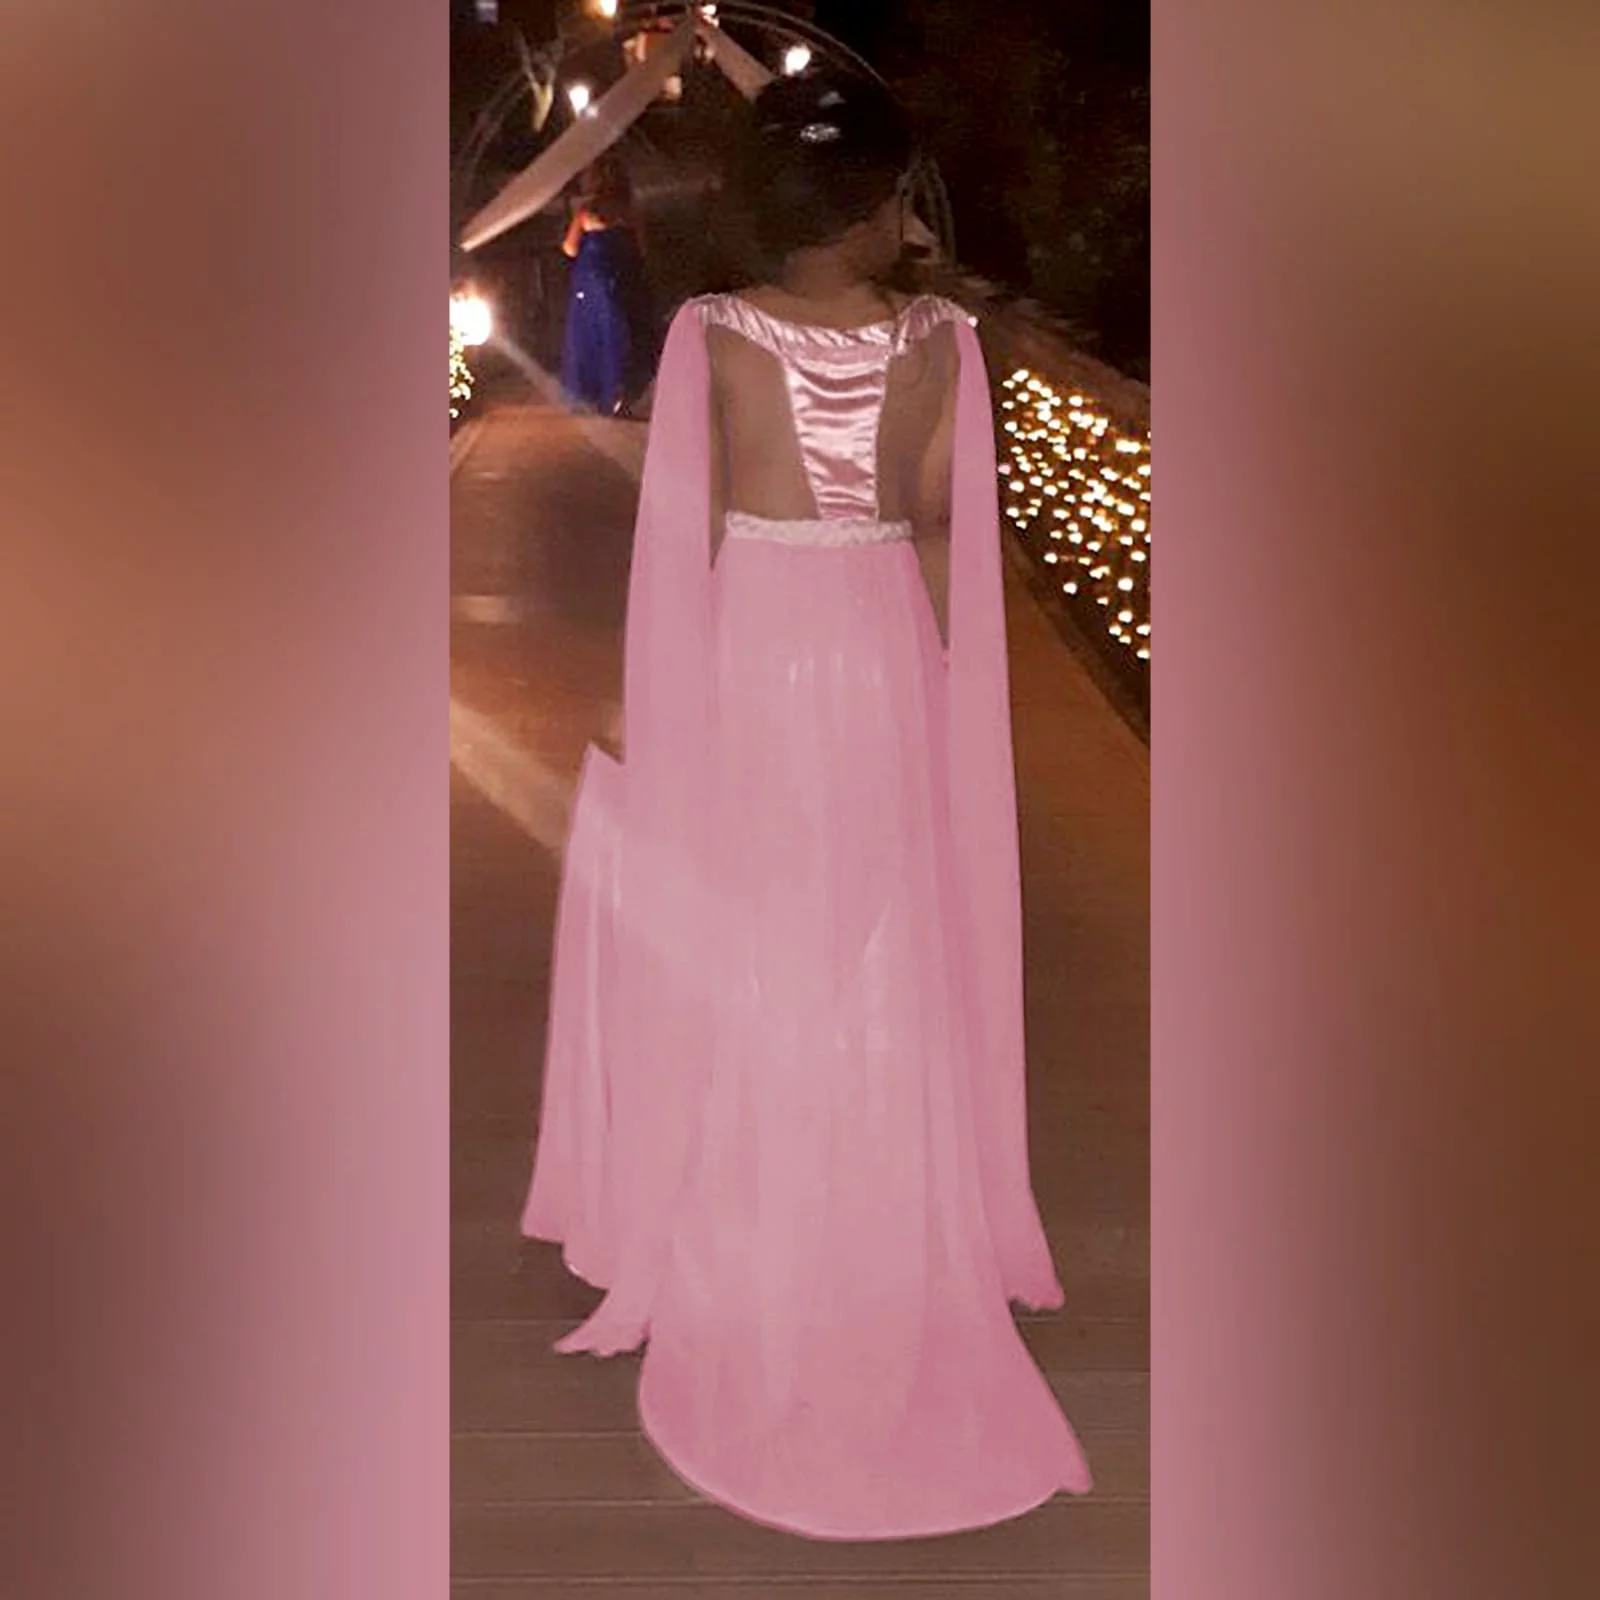 Dusty pink chiffon beaded prom dress 6 dusty pink chiffon beaded prom dress, bateau neckline effect with an illusion back, fully beaded bodice, plaited belt detail with a slit and a train. Shoulders with chiffon draping creating a goddess look.